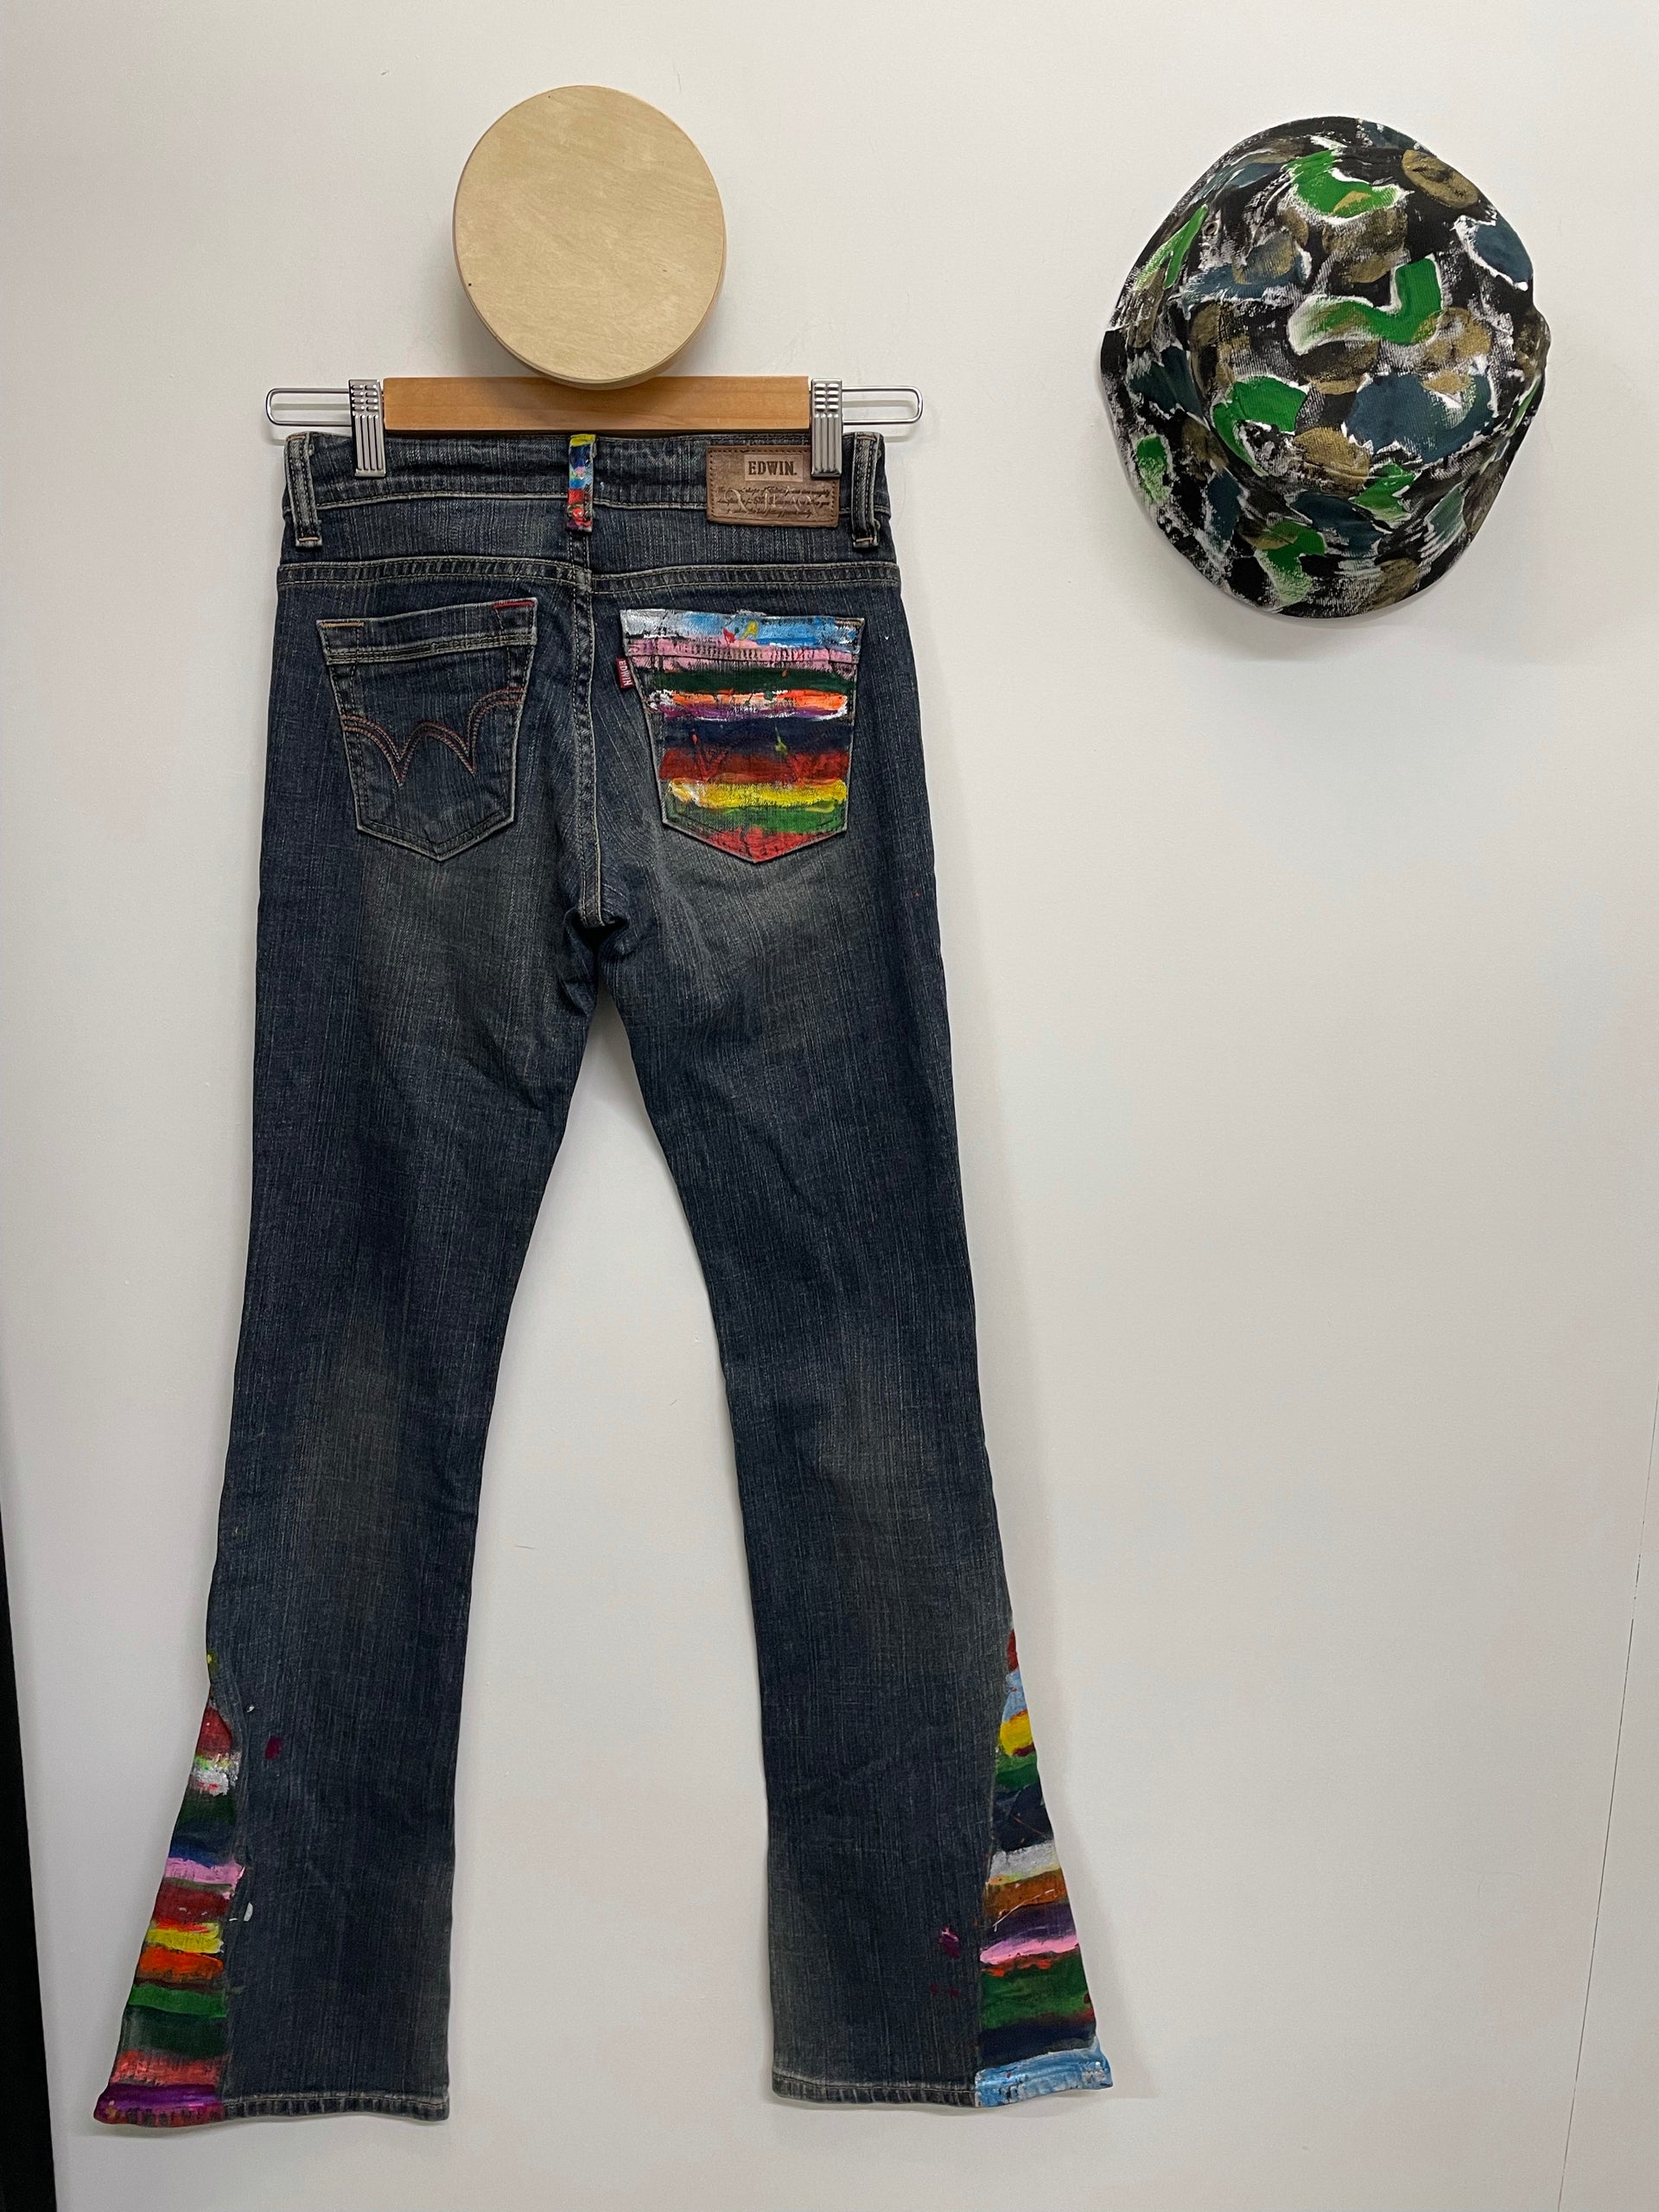 Fanfare Upcycled Embroidered & Patched Jeans - Shop Sustainably on Earthkind UK8